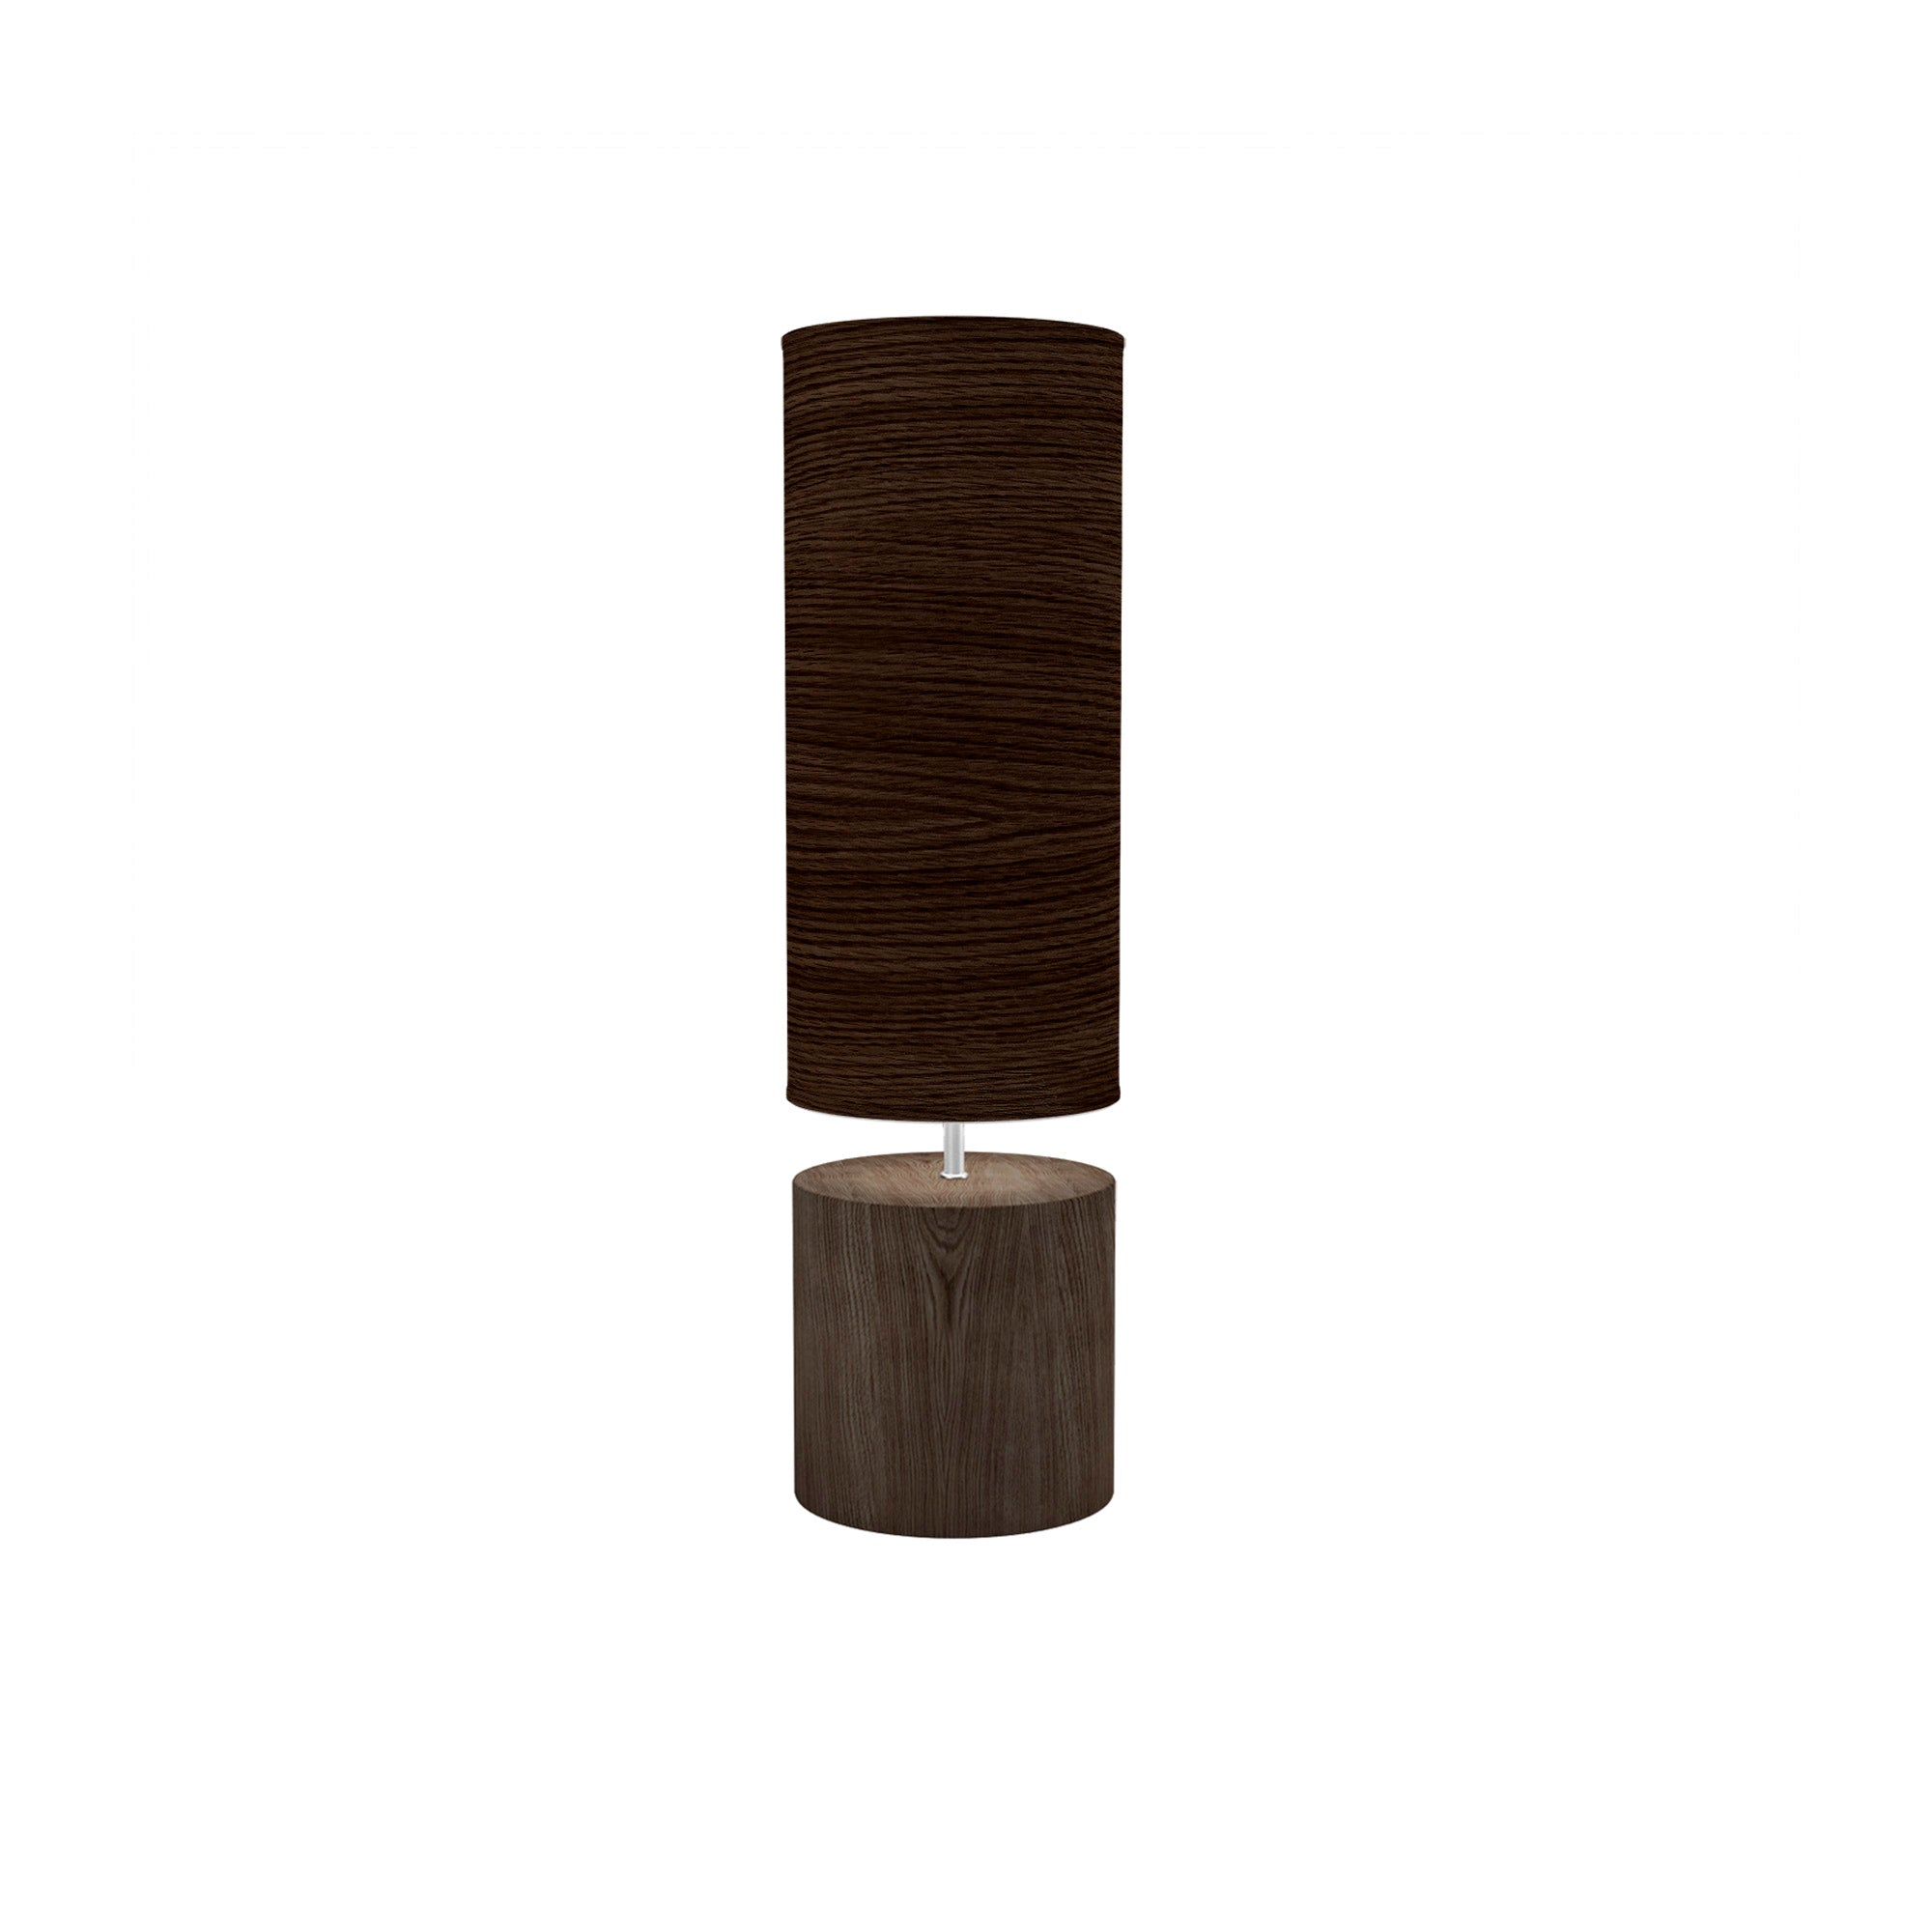 The Laurie Table Lamp from Seascape Fixtures with the walnut base with a photo veneer shade in chocolate color.